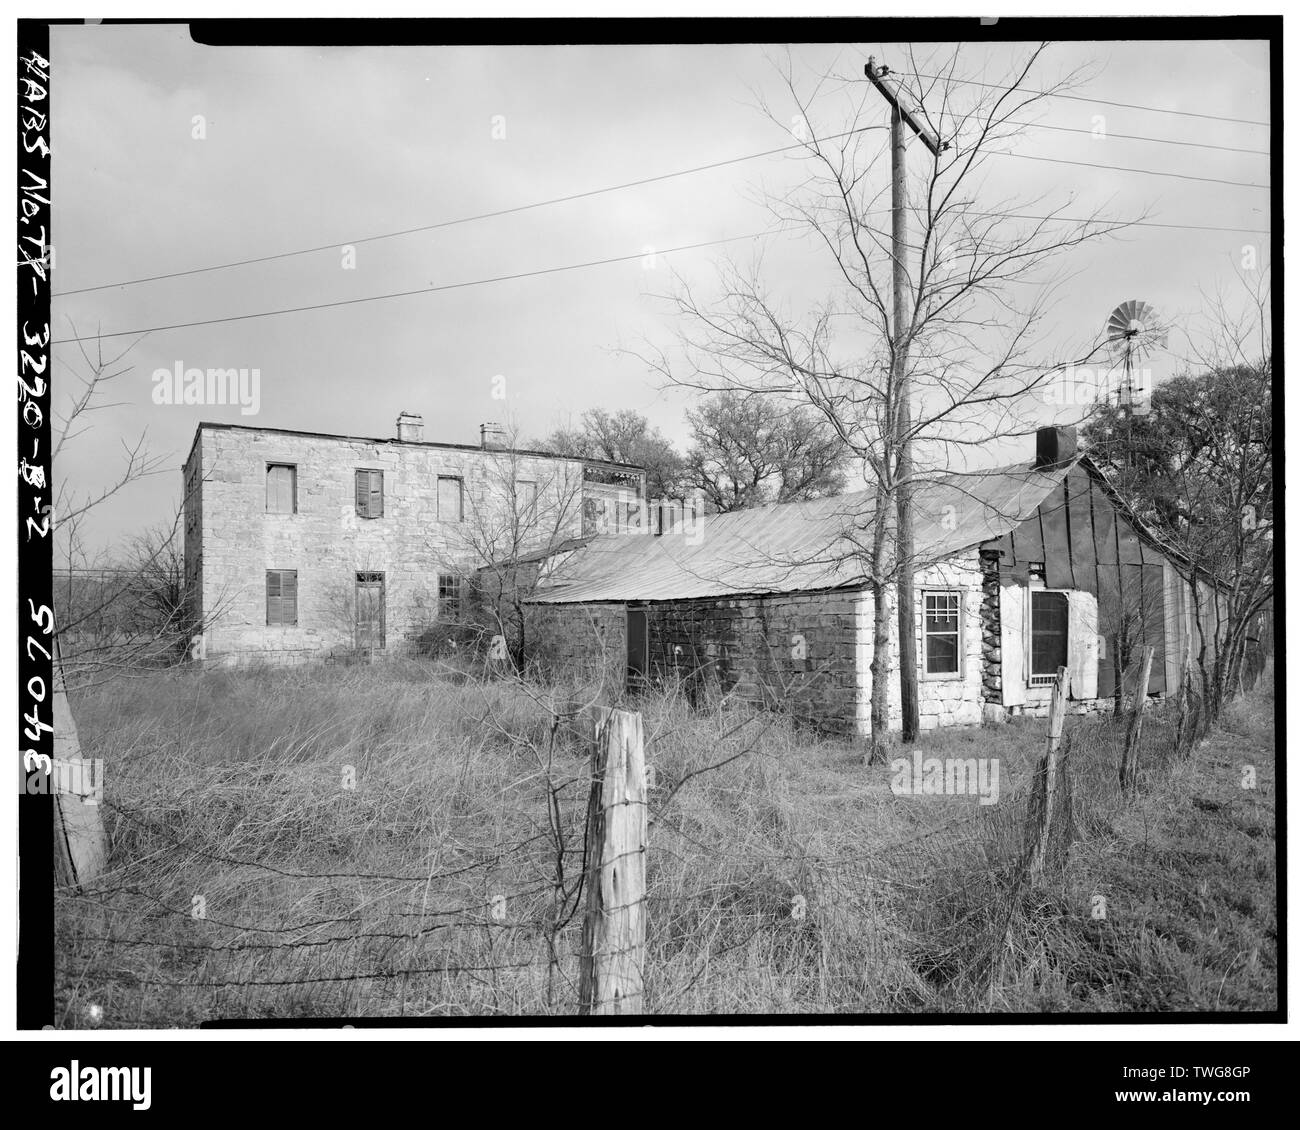 REAR (NORTH) ELEVATION, FROM NORTHWEST. IN BACKGROUND IS 1878 HOUSE (HABS No. TX-3220 C) - Aue Stagecoach Inn and Complex, Max Aue Log House, Boerne Stage Road, Leon Springs, Bexar County, TX Stock Photo